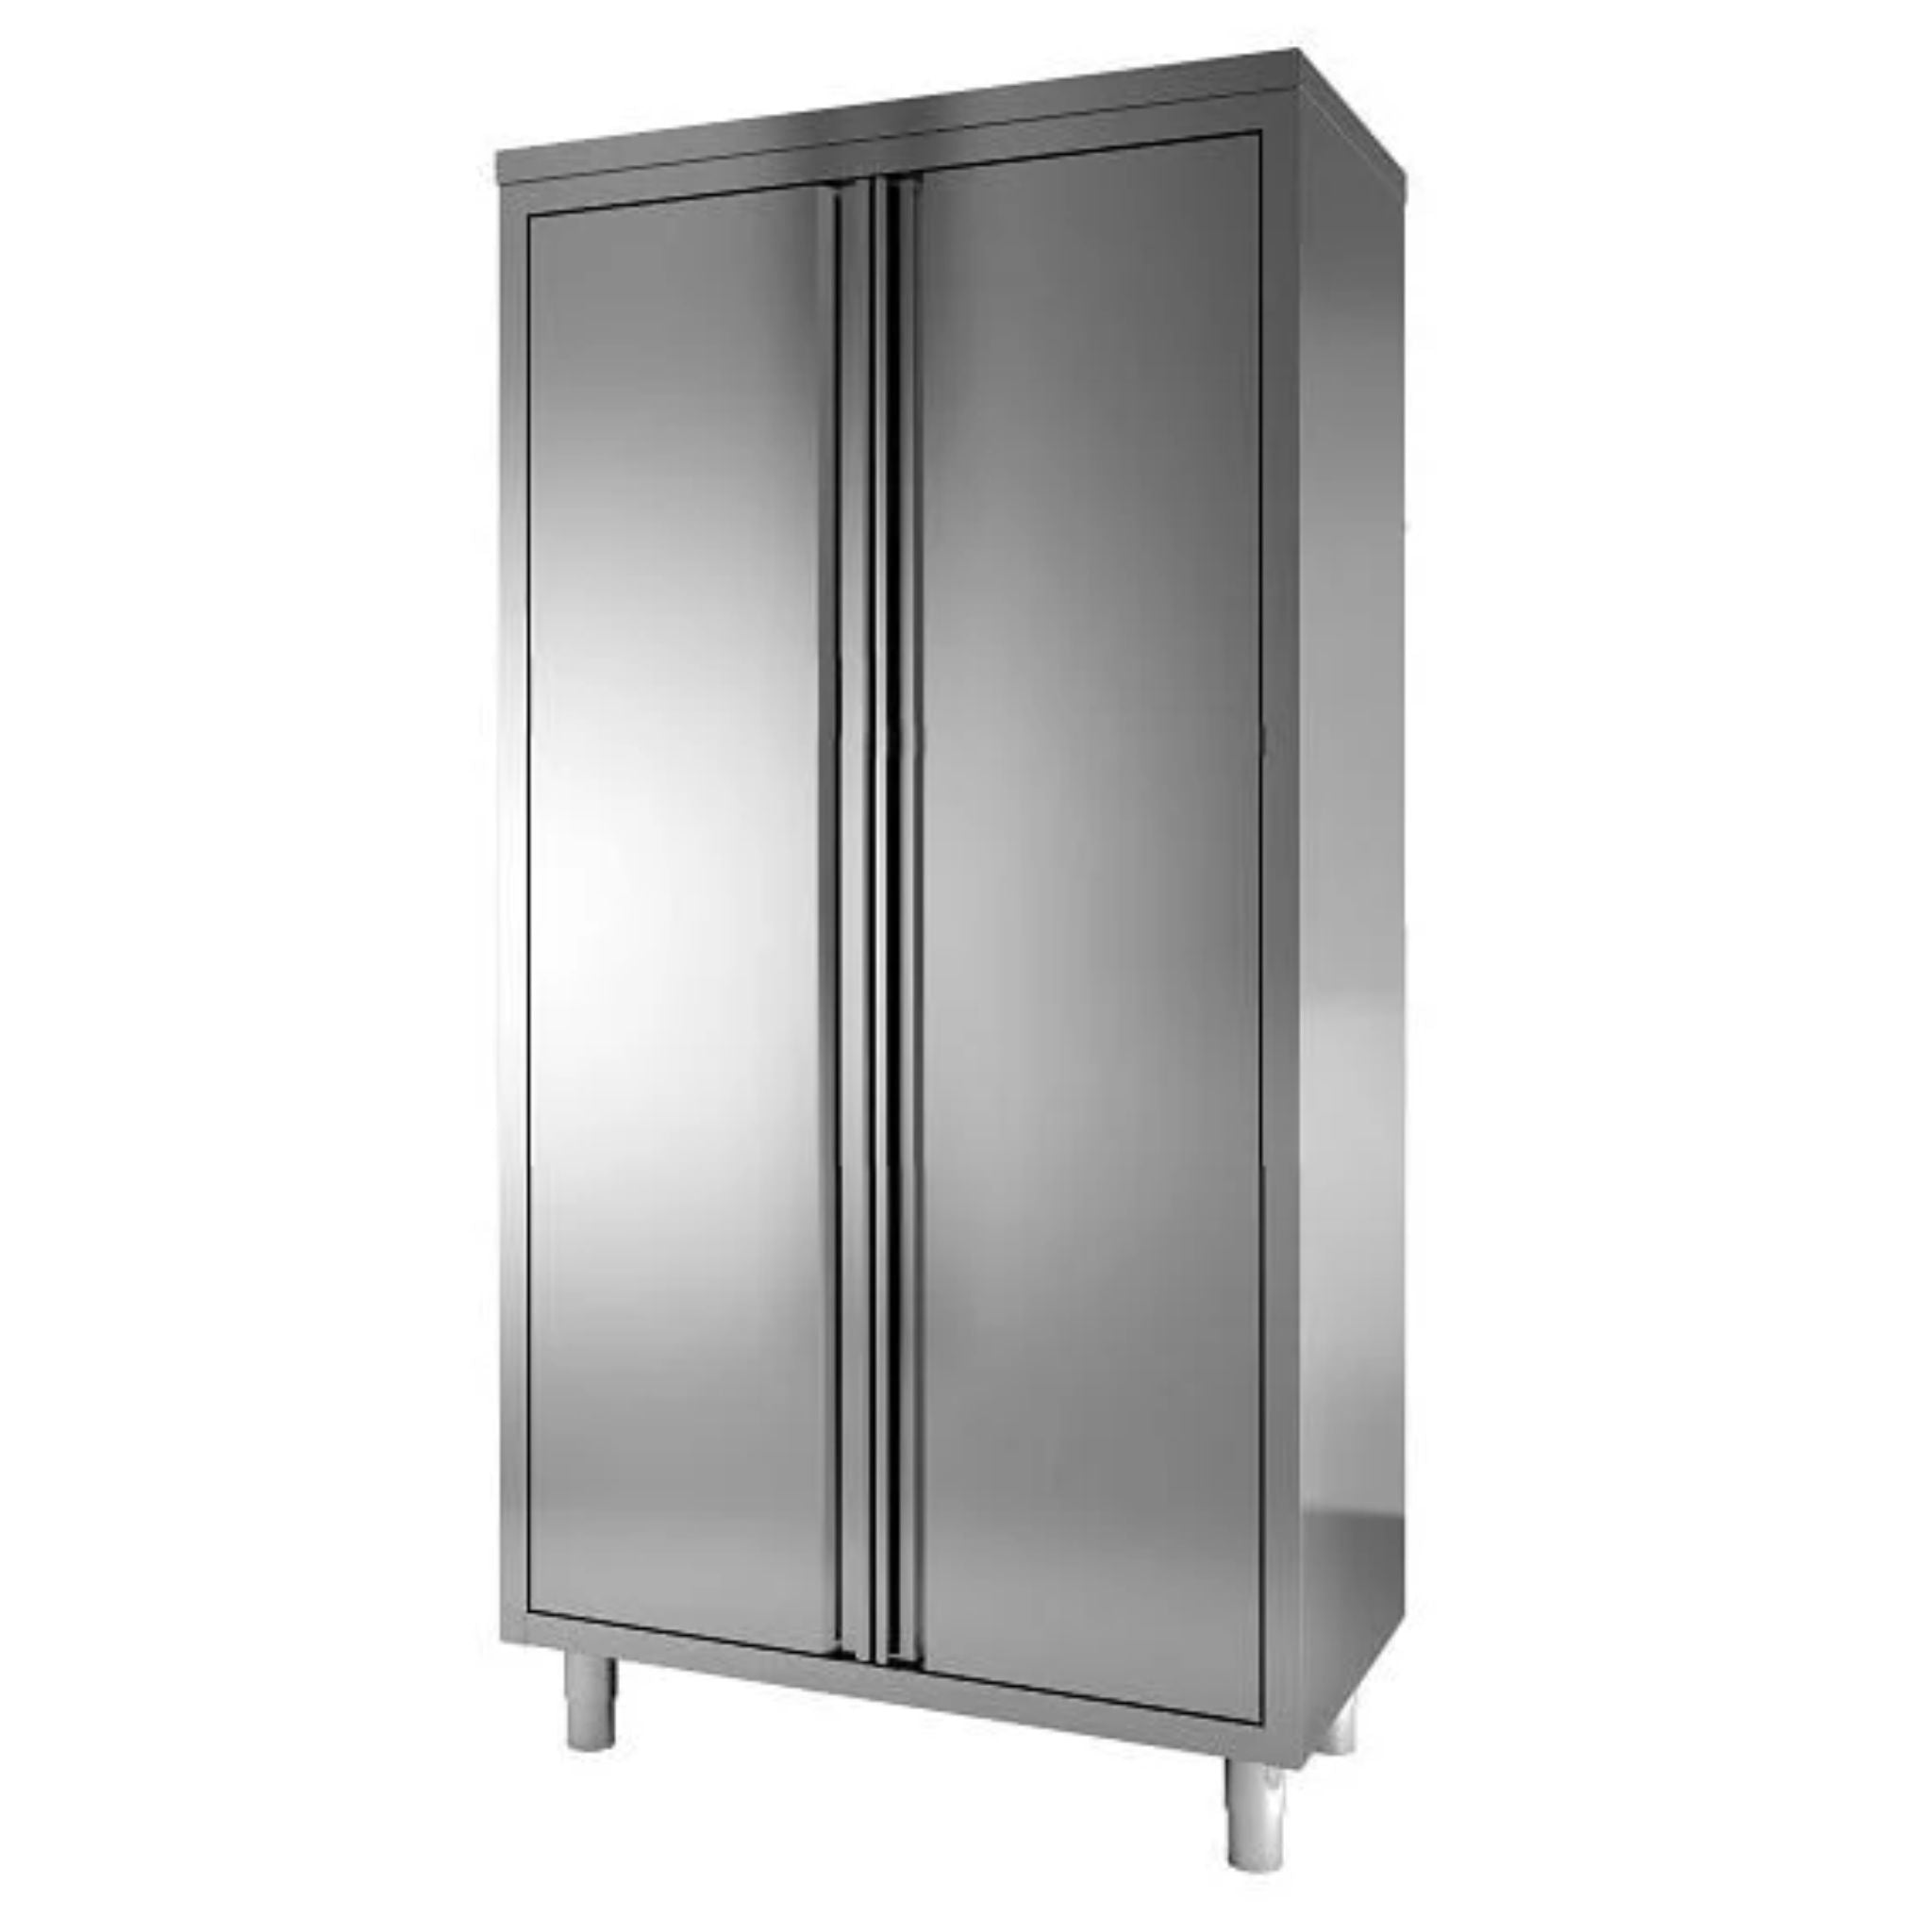 Stainless steel cabinet with hinged door Standard